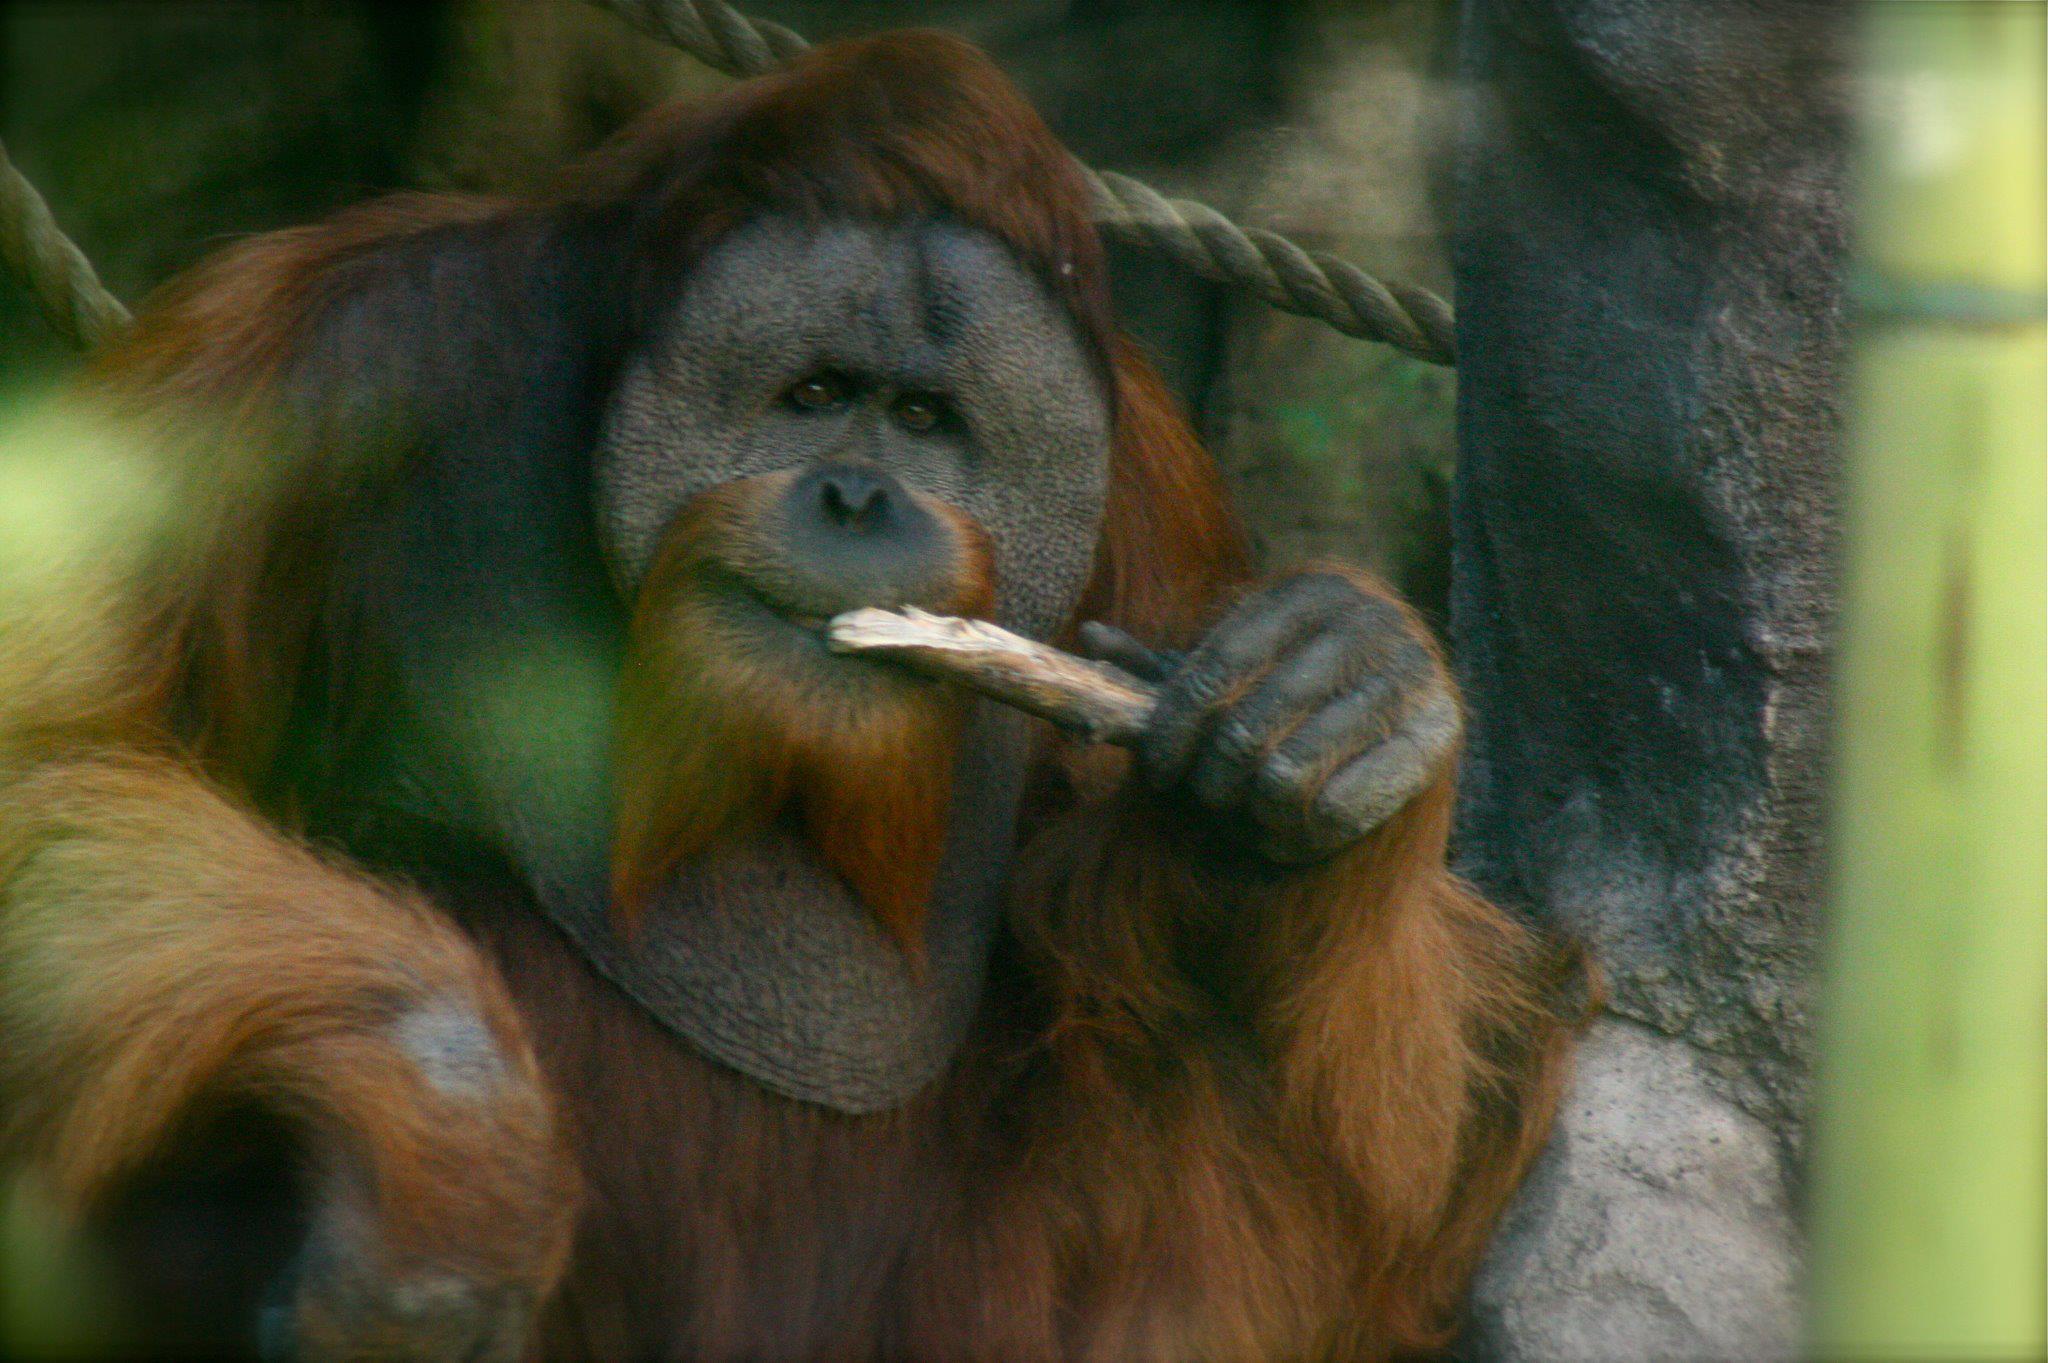 Orangutans in zoos: Kutai's life shows the problems and improvements for  great apes.